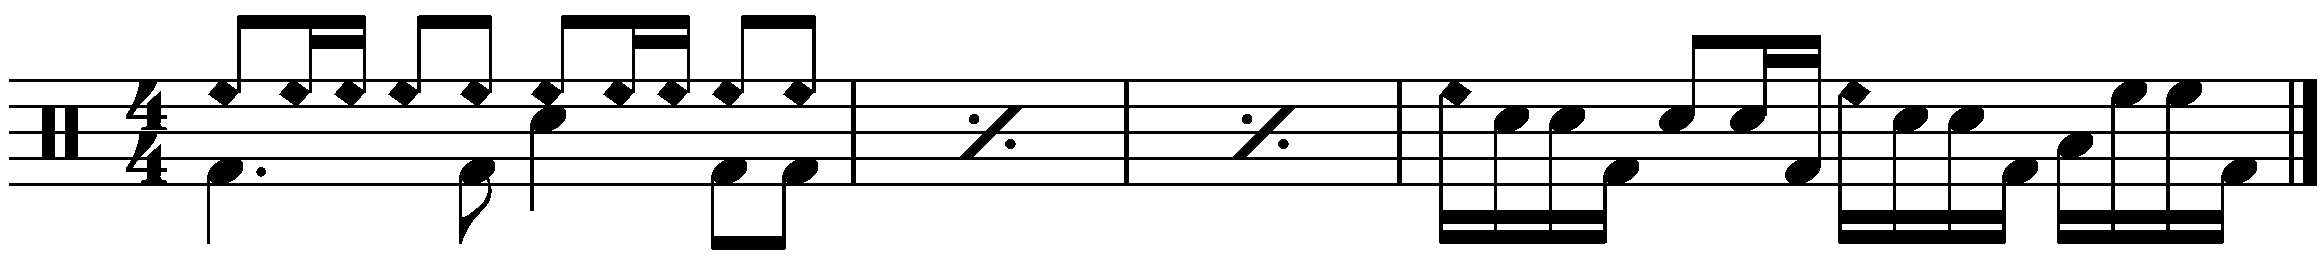 A four bar phrase containing a fill built using the RLRF shape